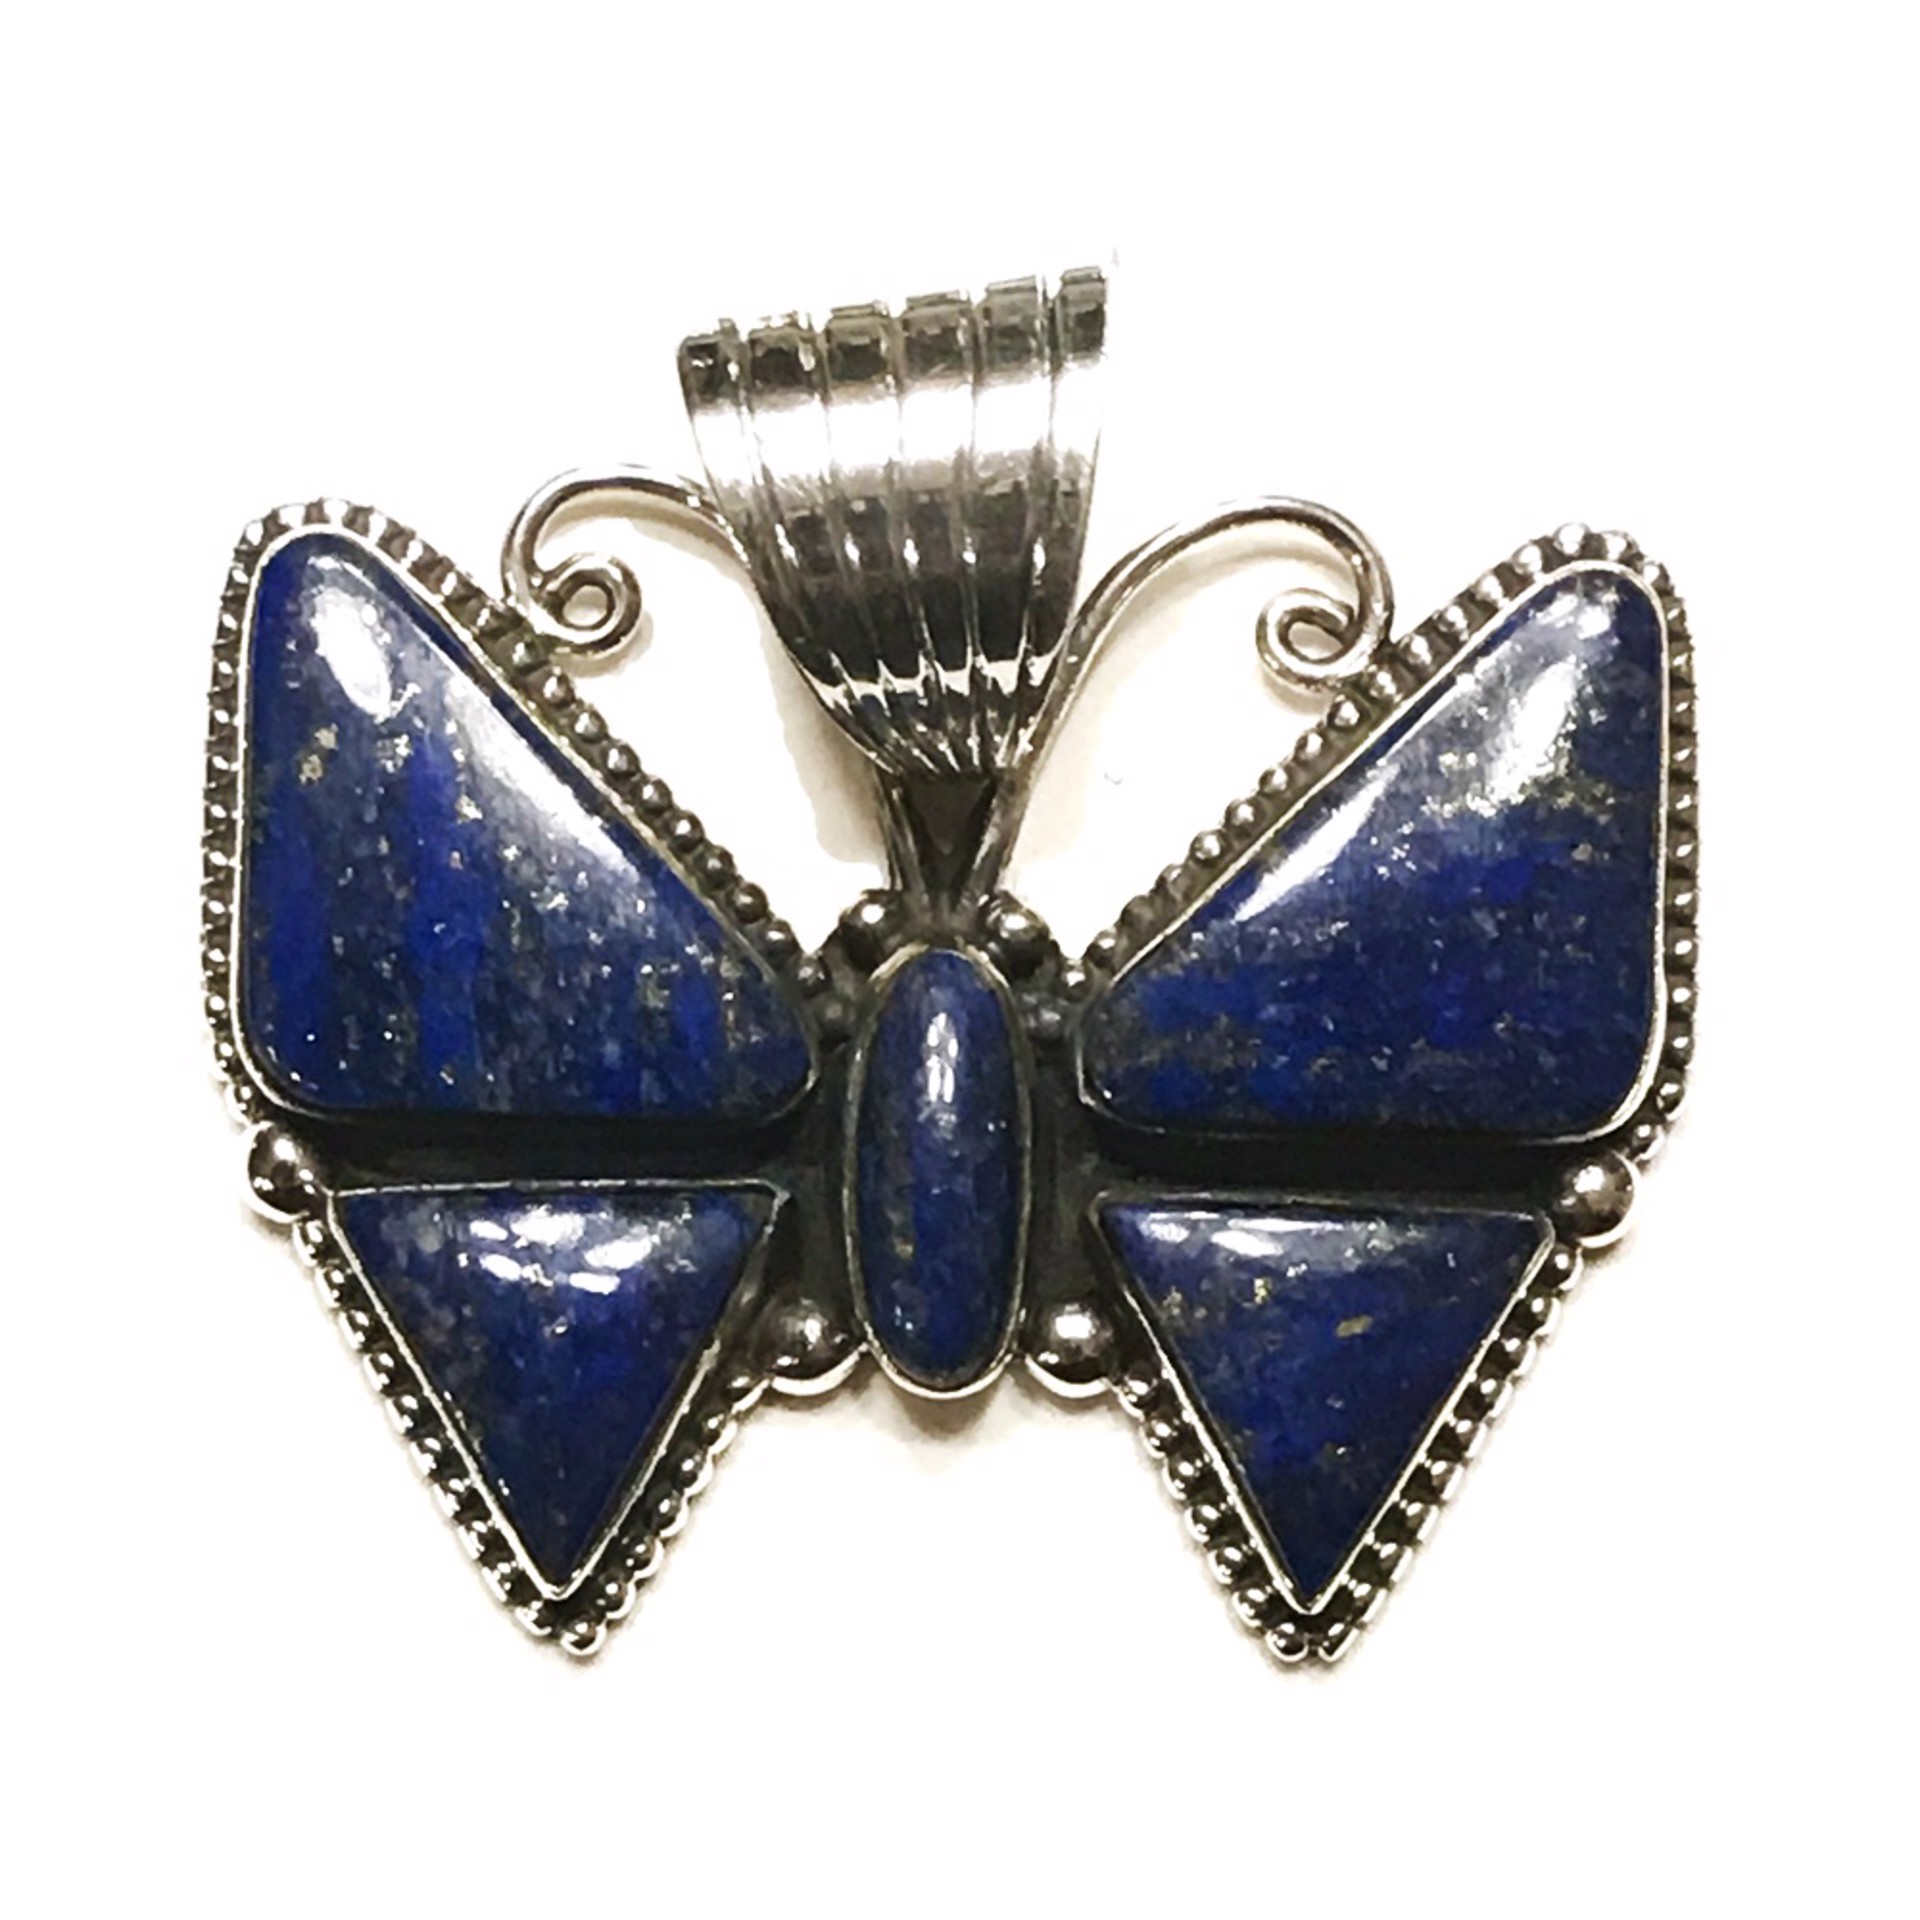 Pendant - Butterfly, Lapis and Sterling Silver by Dan Dodson